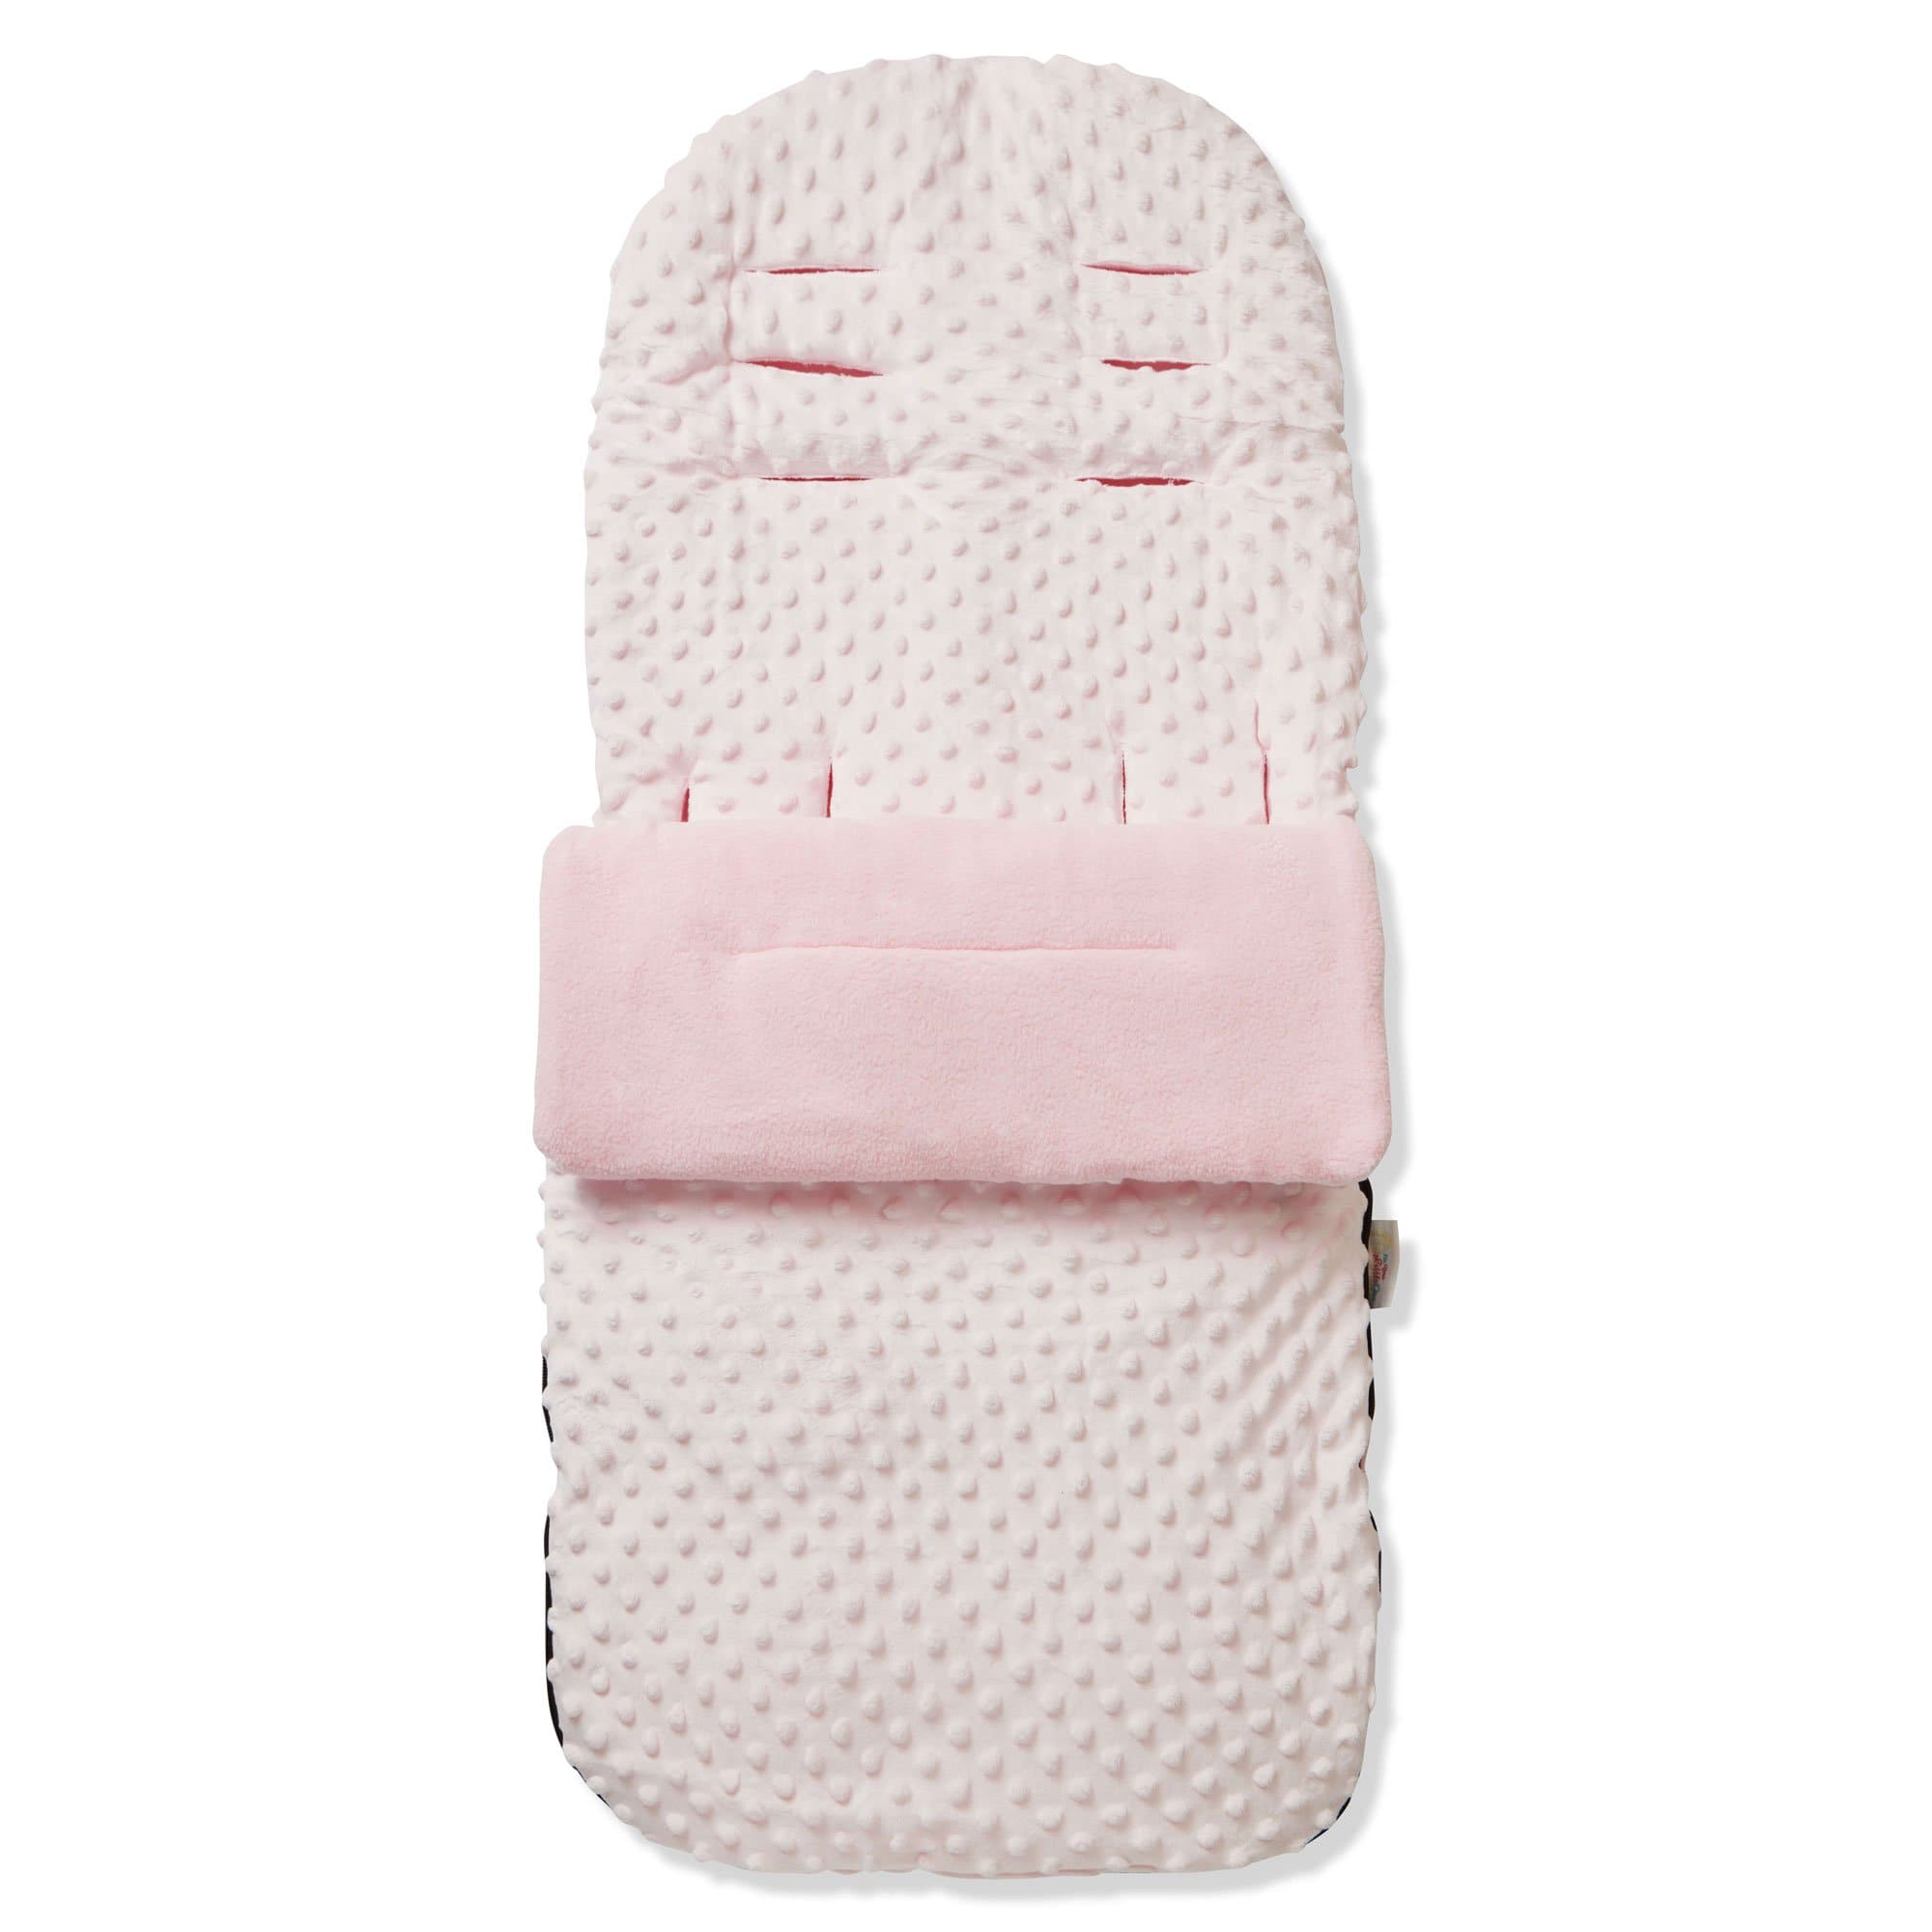 Dimple Footmuff / Cosy Toes Compatible with Hybrid - Pink / Fits All Models | For Your Little One